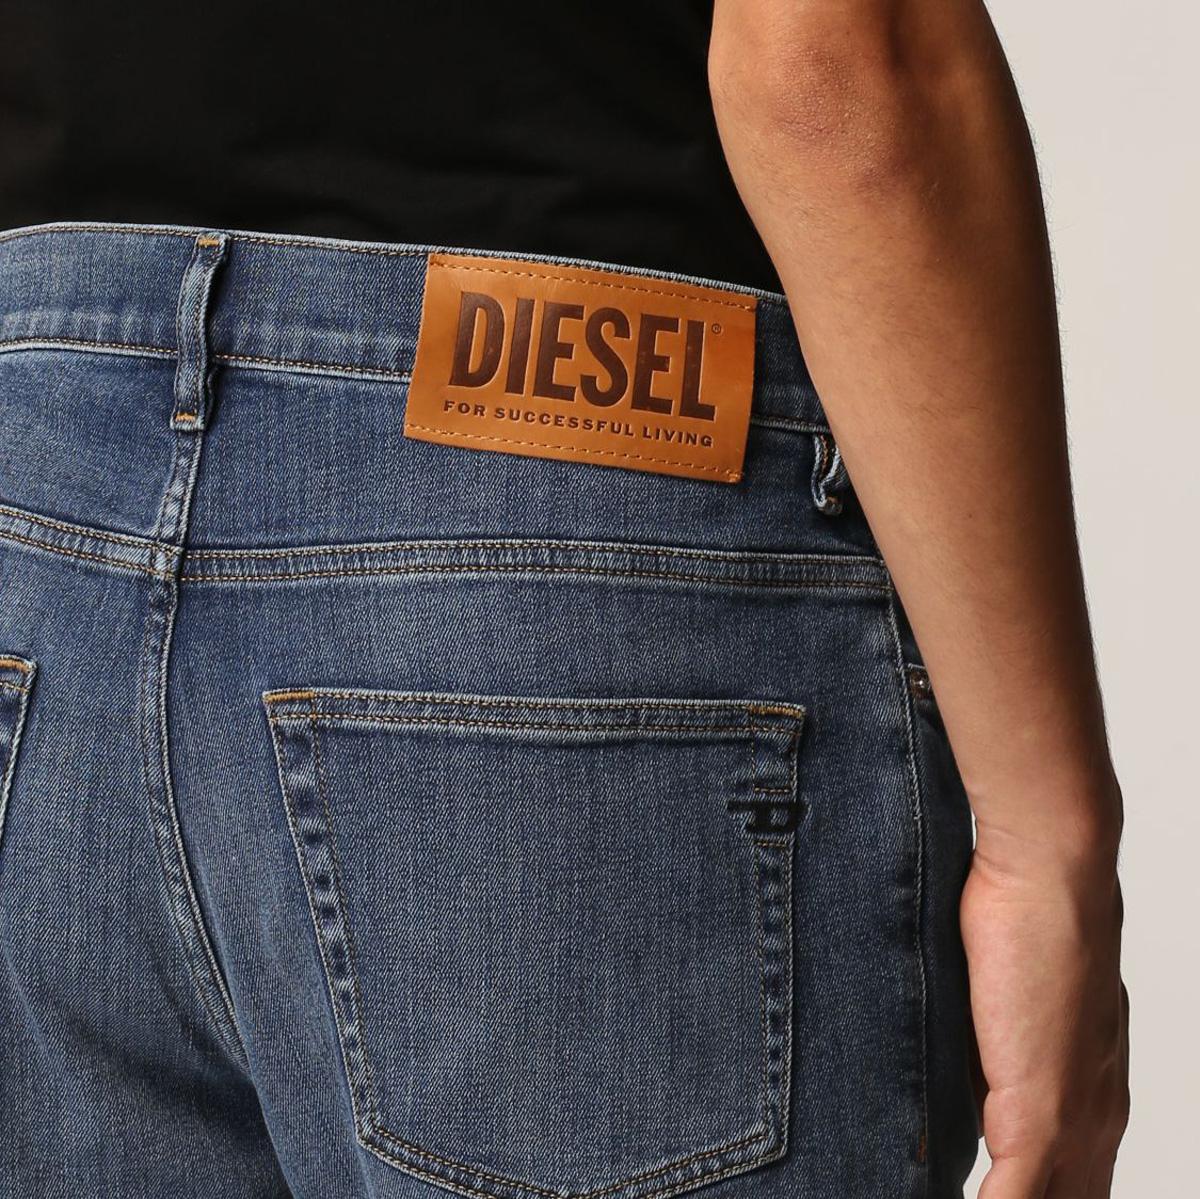 diesel jeans size chart whats my size in diesel jeans